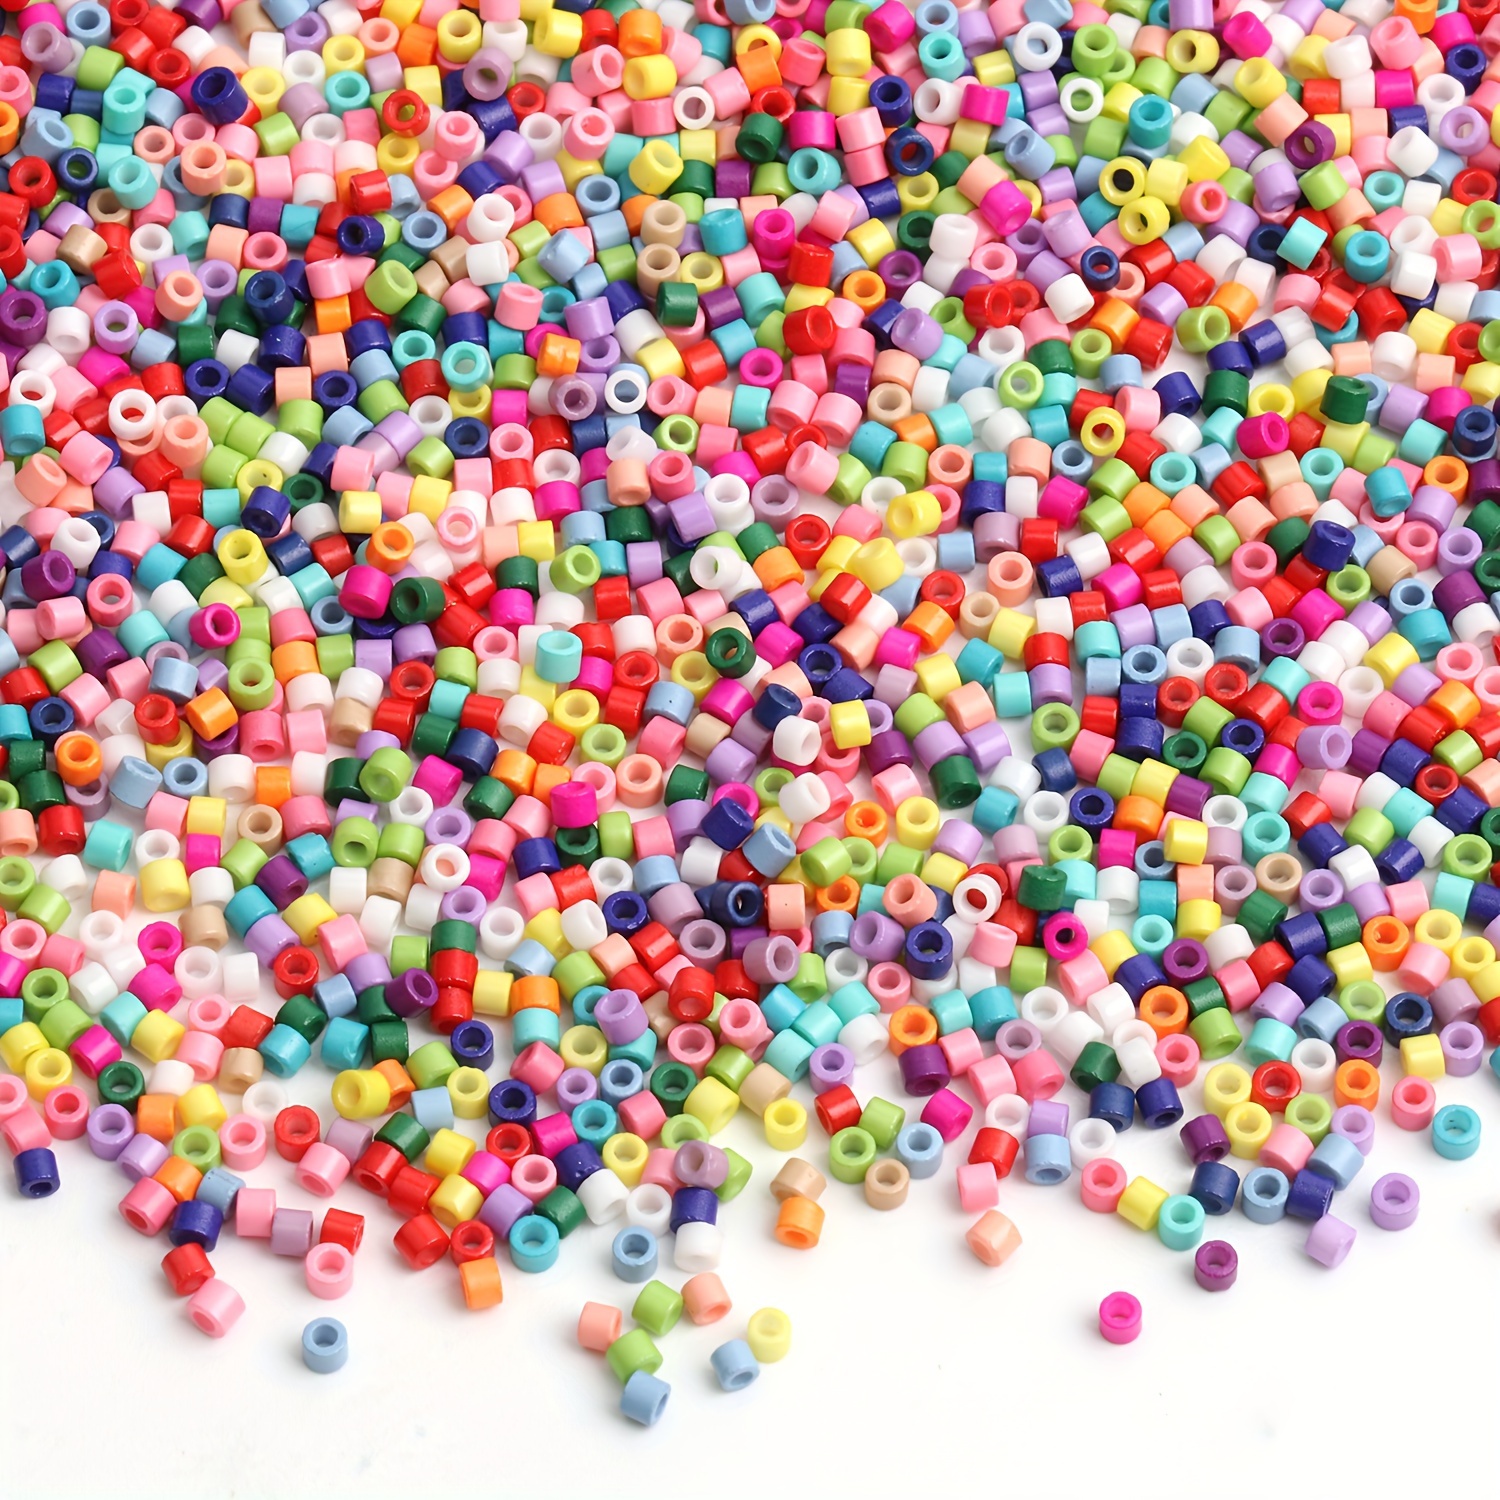 

2000pcs/bag 2mm Glass Seed Acrylic Bead Charms, Round Loose Spacer Beads For Jewelry Making Diy Bracelet Earrings